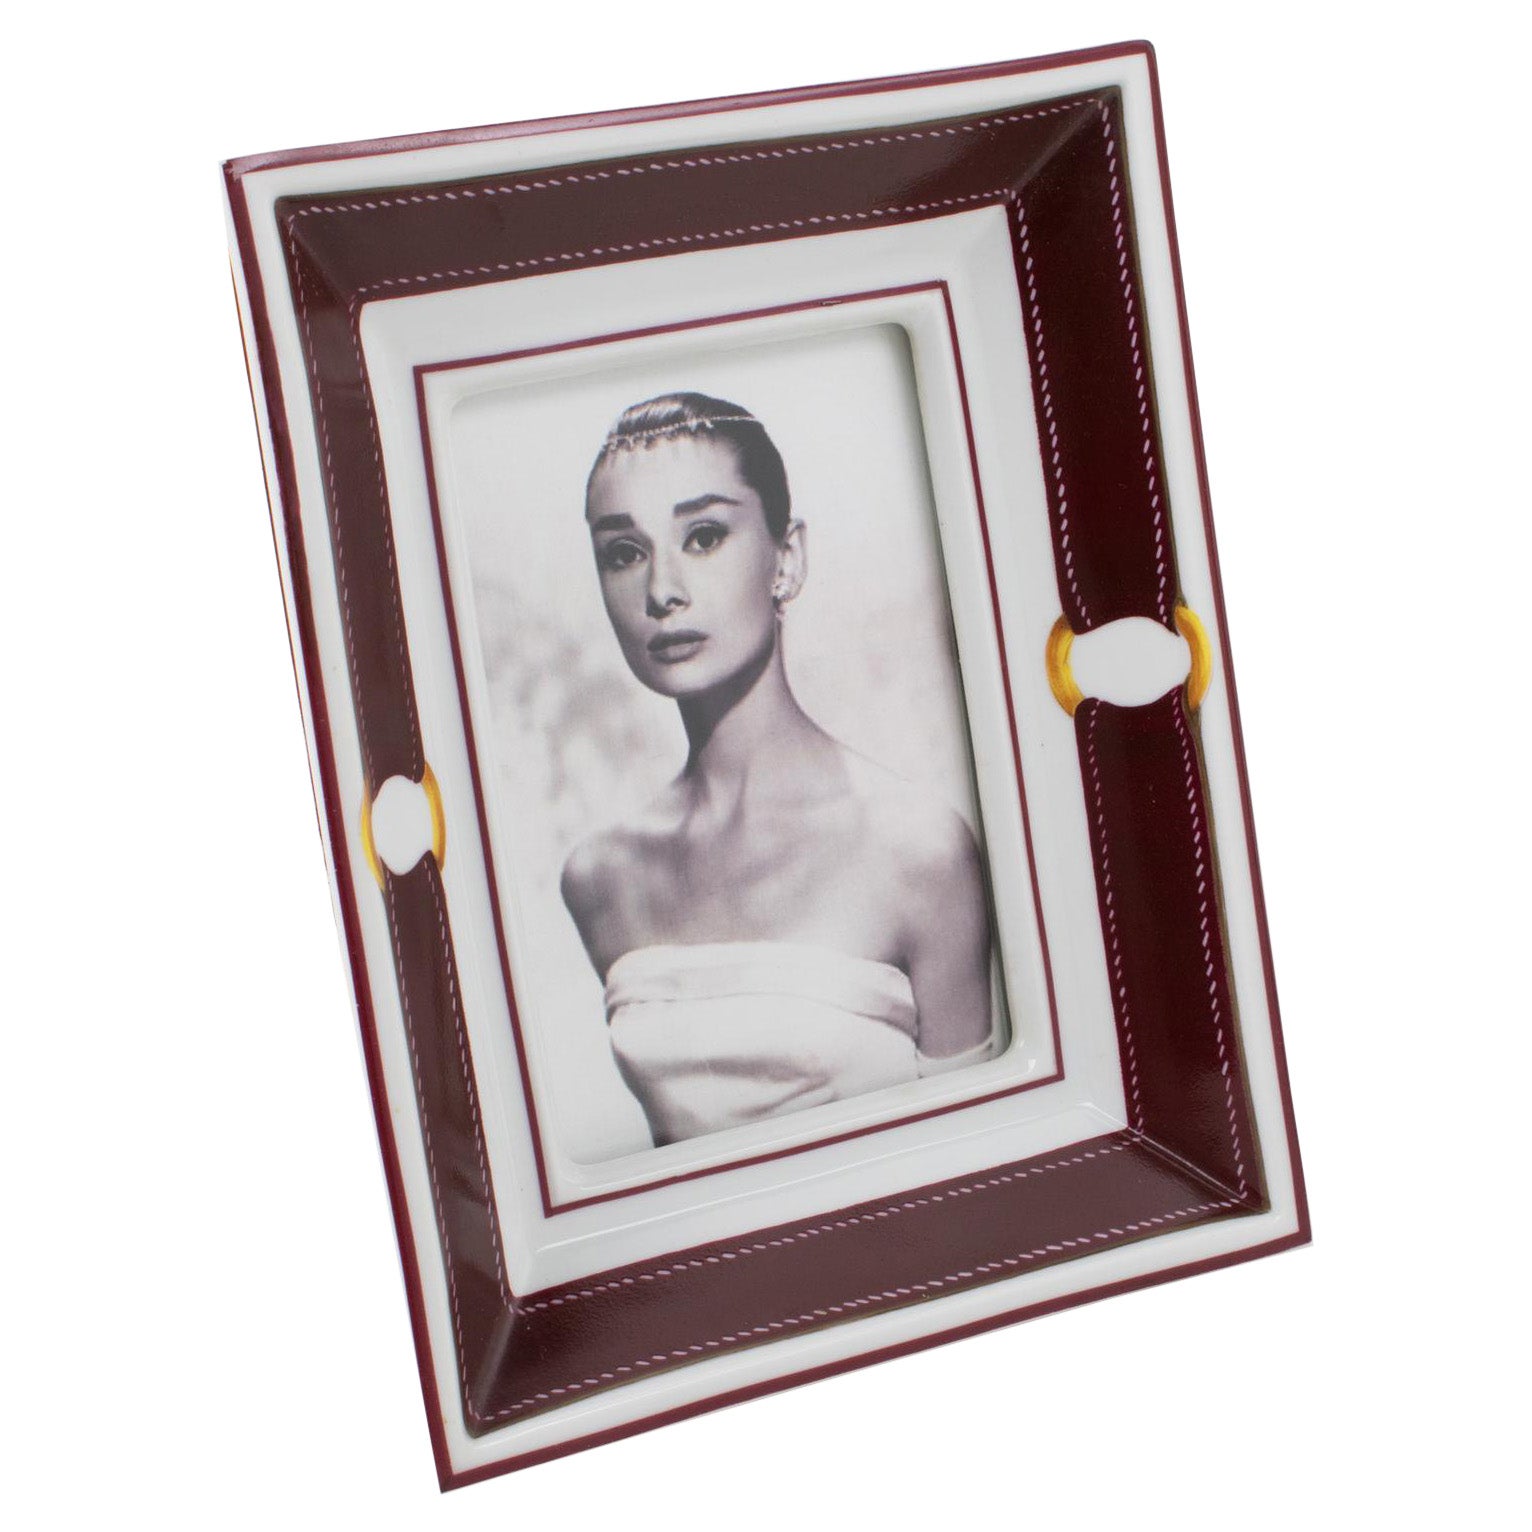 Hermes Paris White and Burgundy-Red Limoges Porcelain Picture Frame